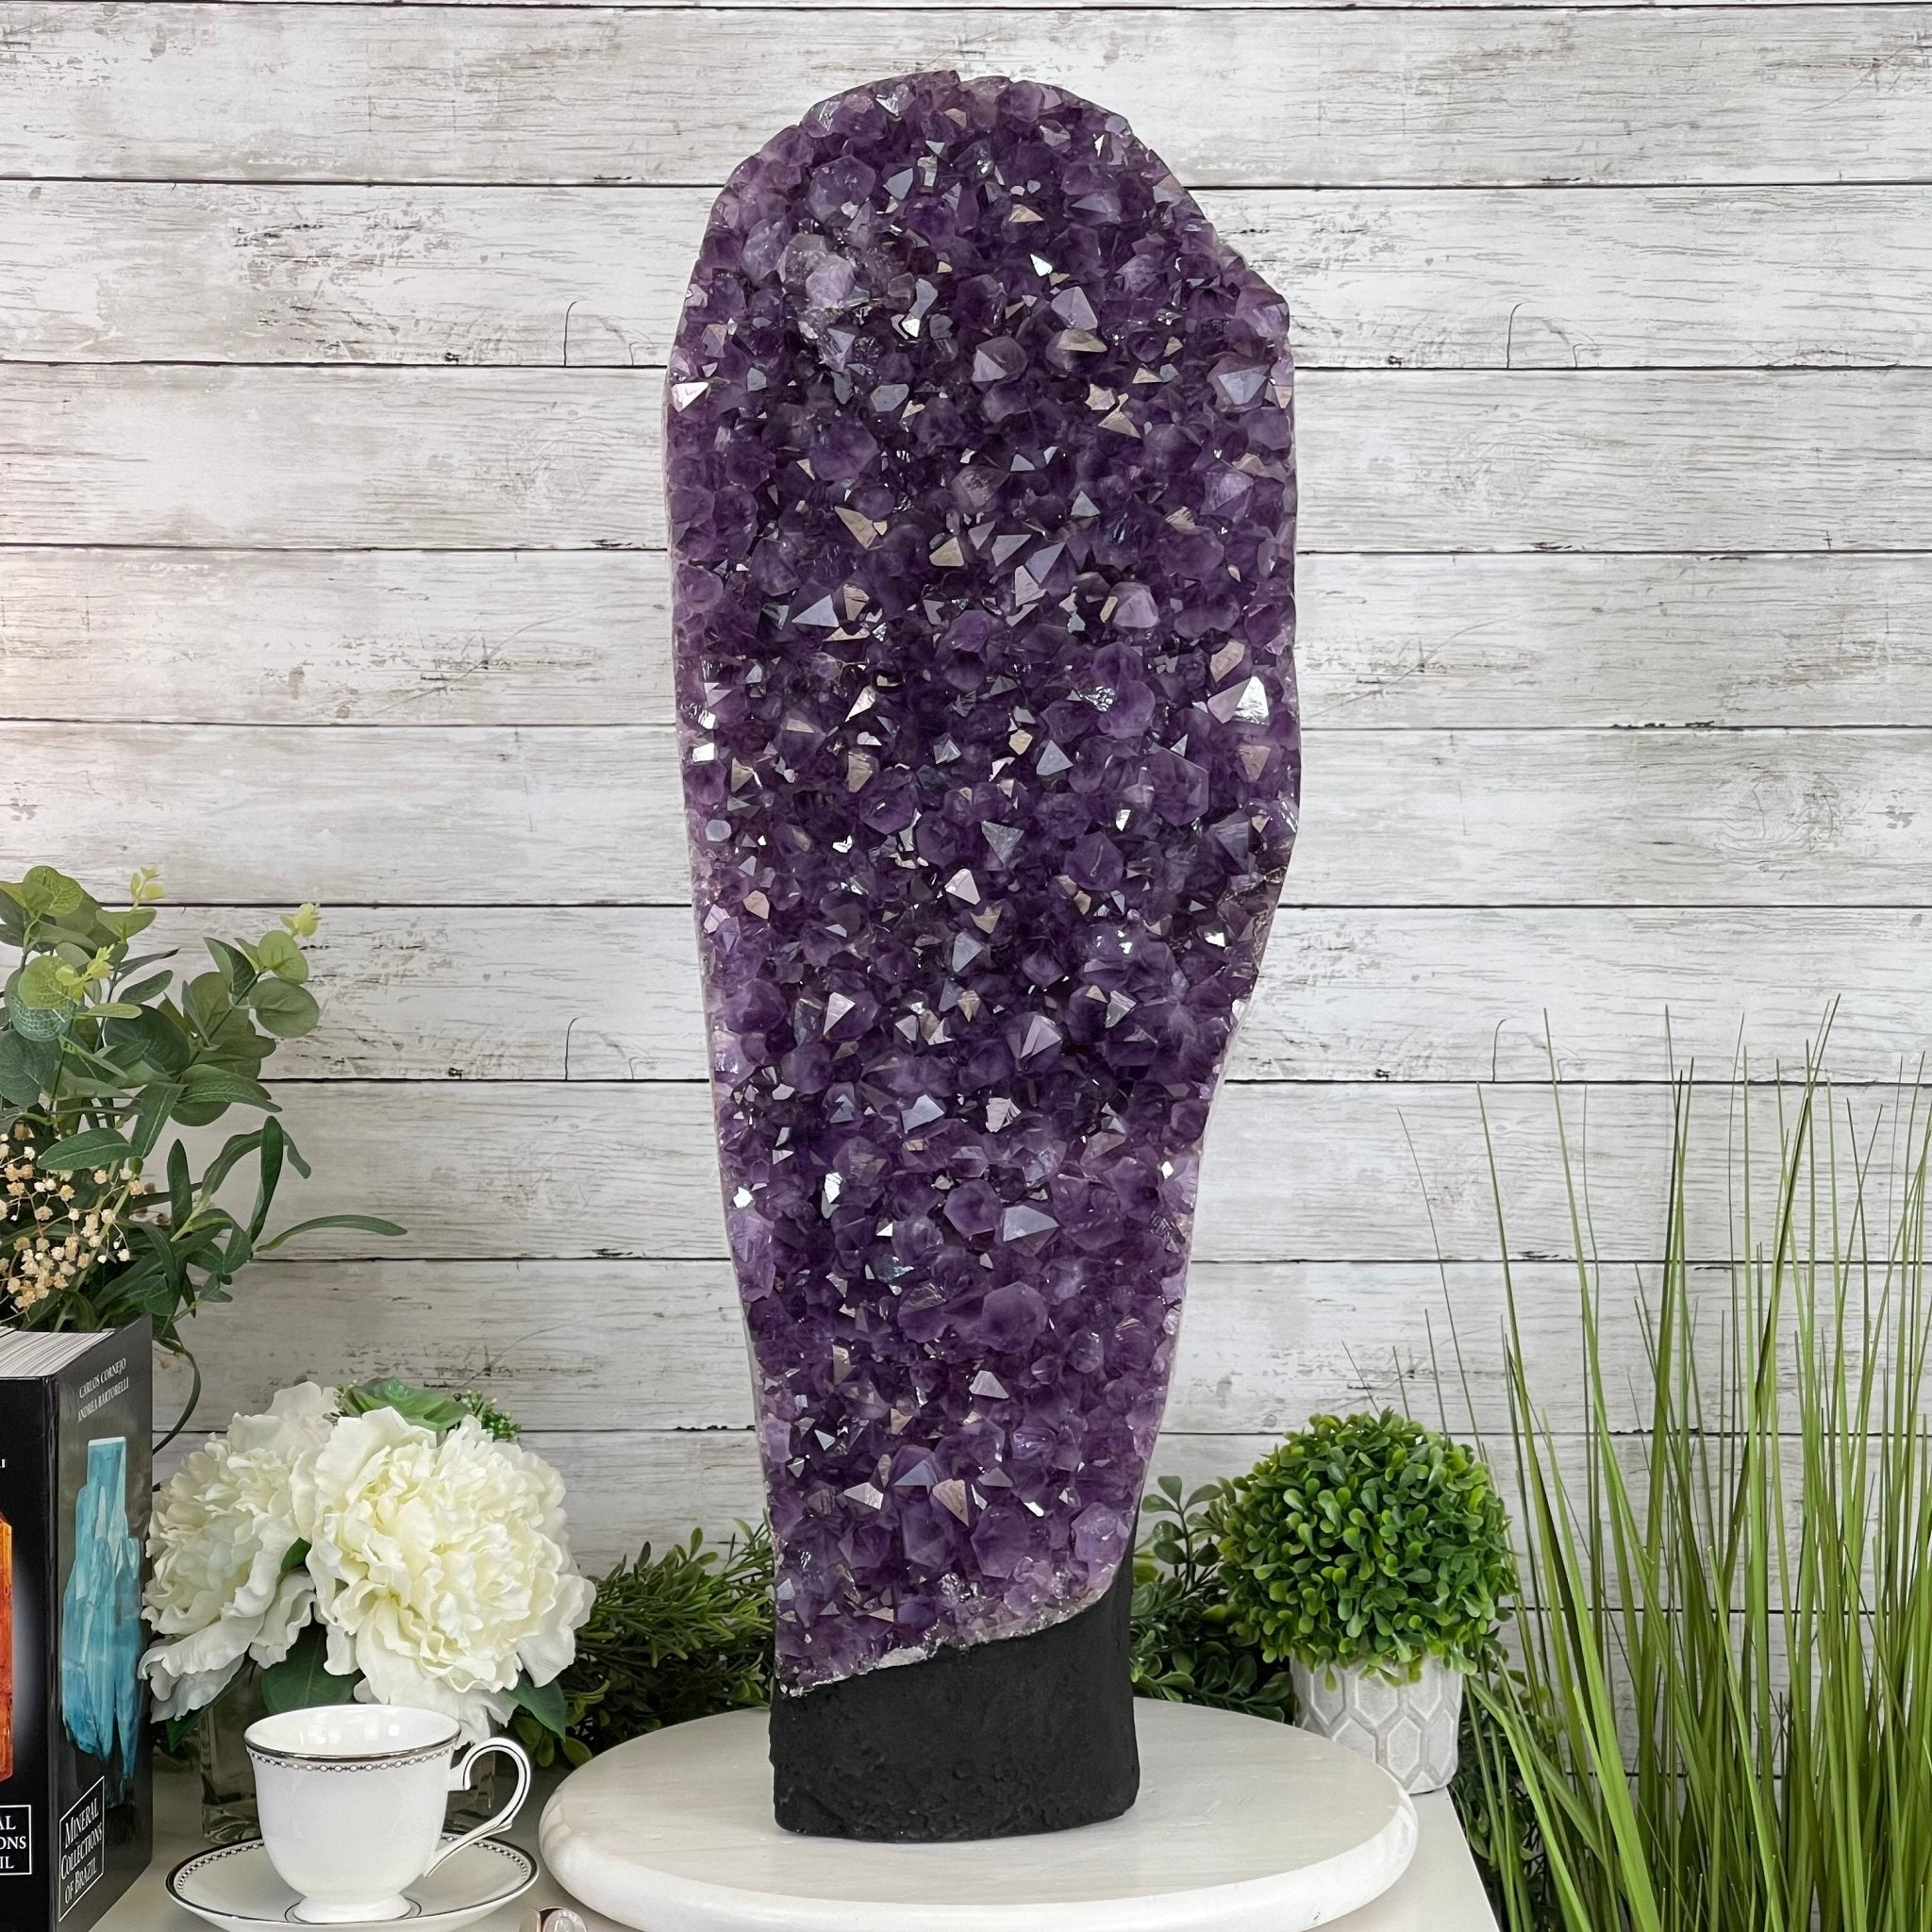 Extra Quality Amethyst Druse Cluster on Cement Base, 82 lbs and 29.3" Tall #5614-0063 - Brazil GemsBrazil GemsExtra Quality Amethyst Druse Cluster on Cement Base, 82 lbs and 29.3" Tall #5614-0063Clusters on Cement Bases5614-0063